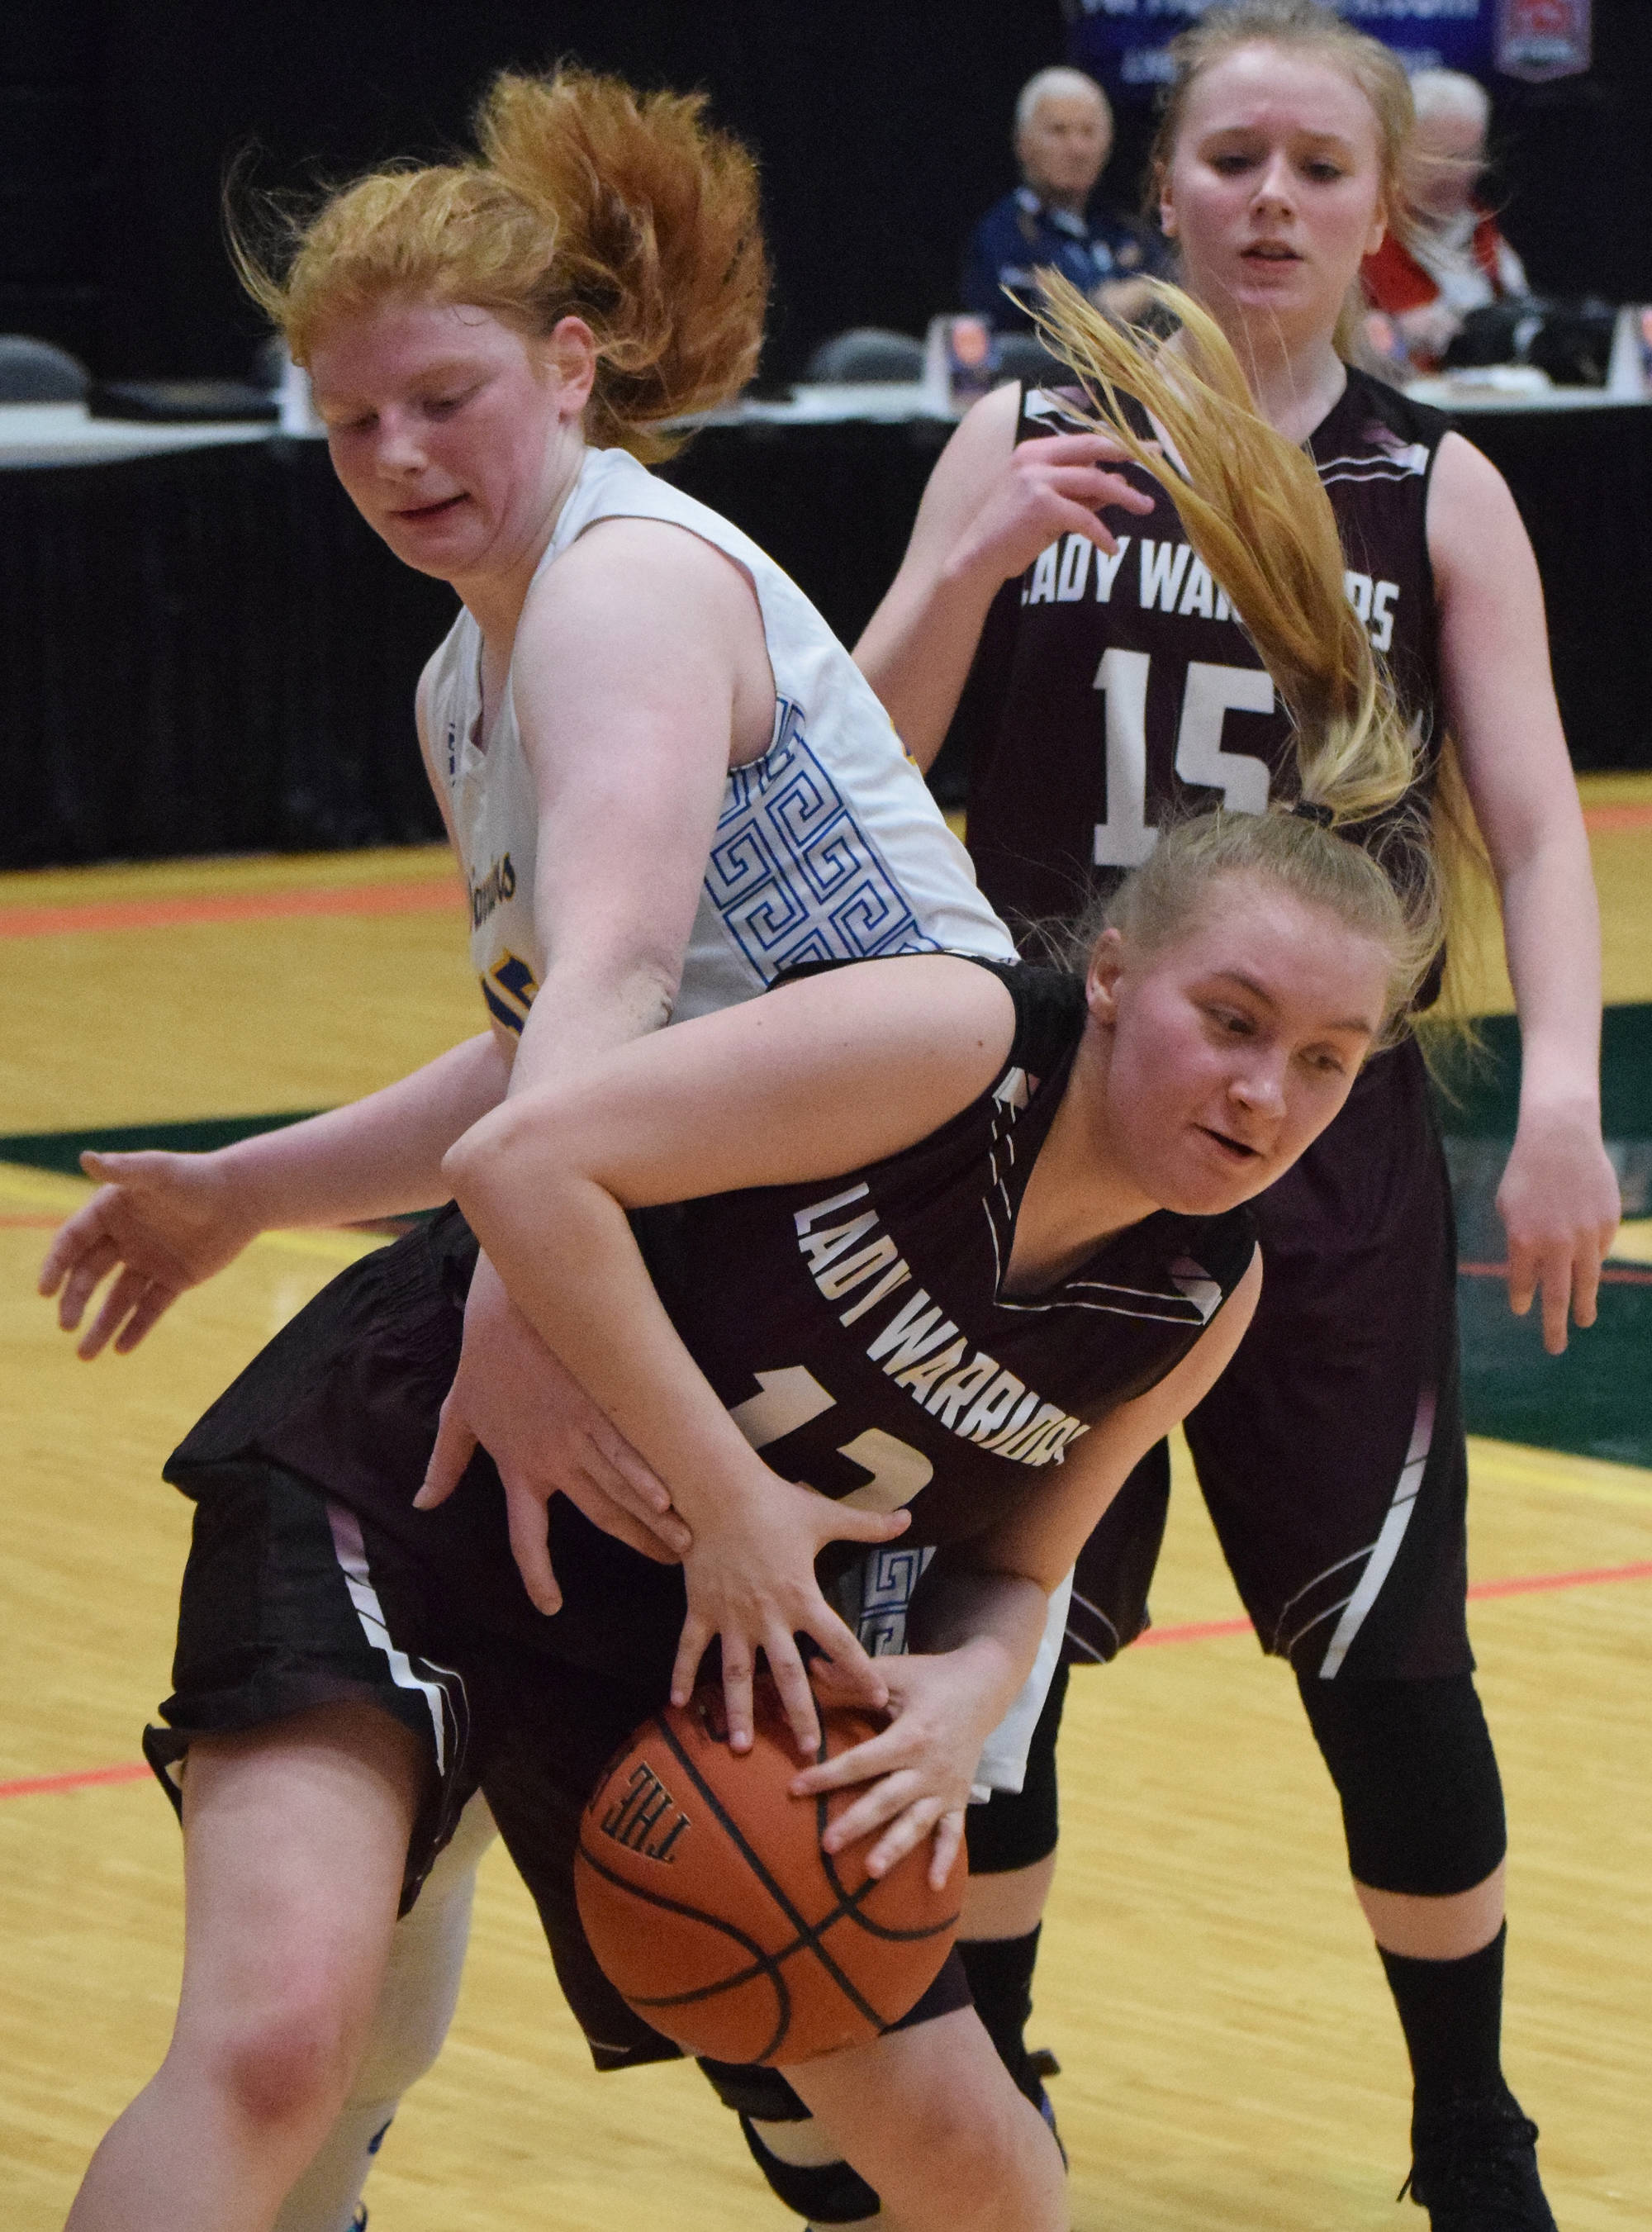 Nikolaevsk’s Kerianna Lasiter (below) beats Tri-Valley’s Victoria Pennington to a rebound Thursday at the Class 1A girls state basketball tournament in Anchorage. (Photo by Joey Klecka/Peninsula Clarion)